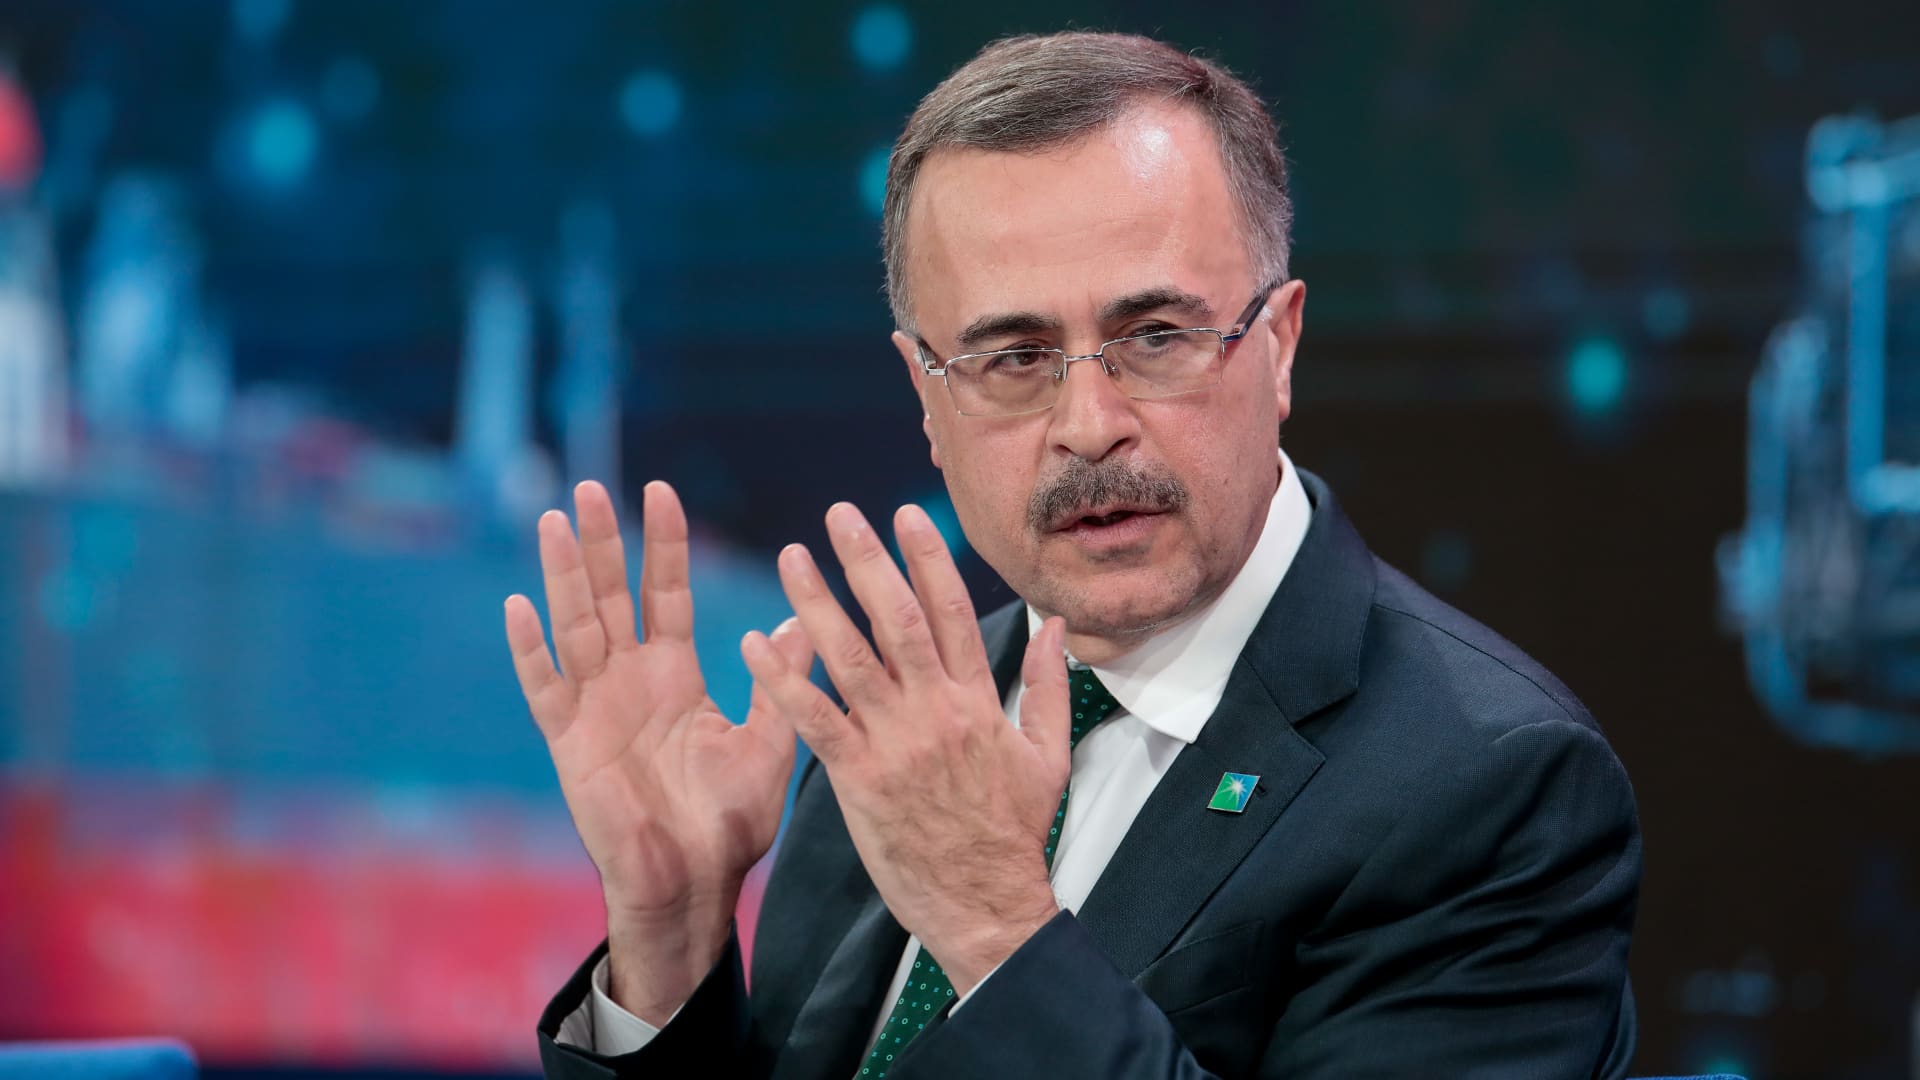 Oil giant Aramco says windfall taxes 'not helpful' and could stifle decarbonization